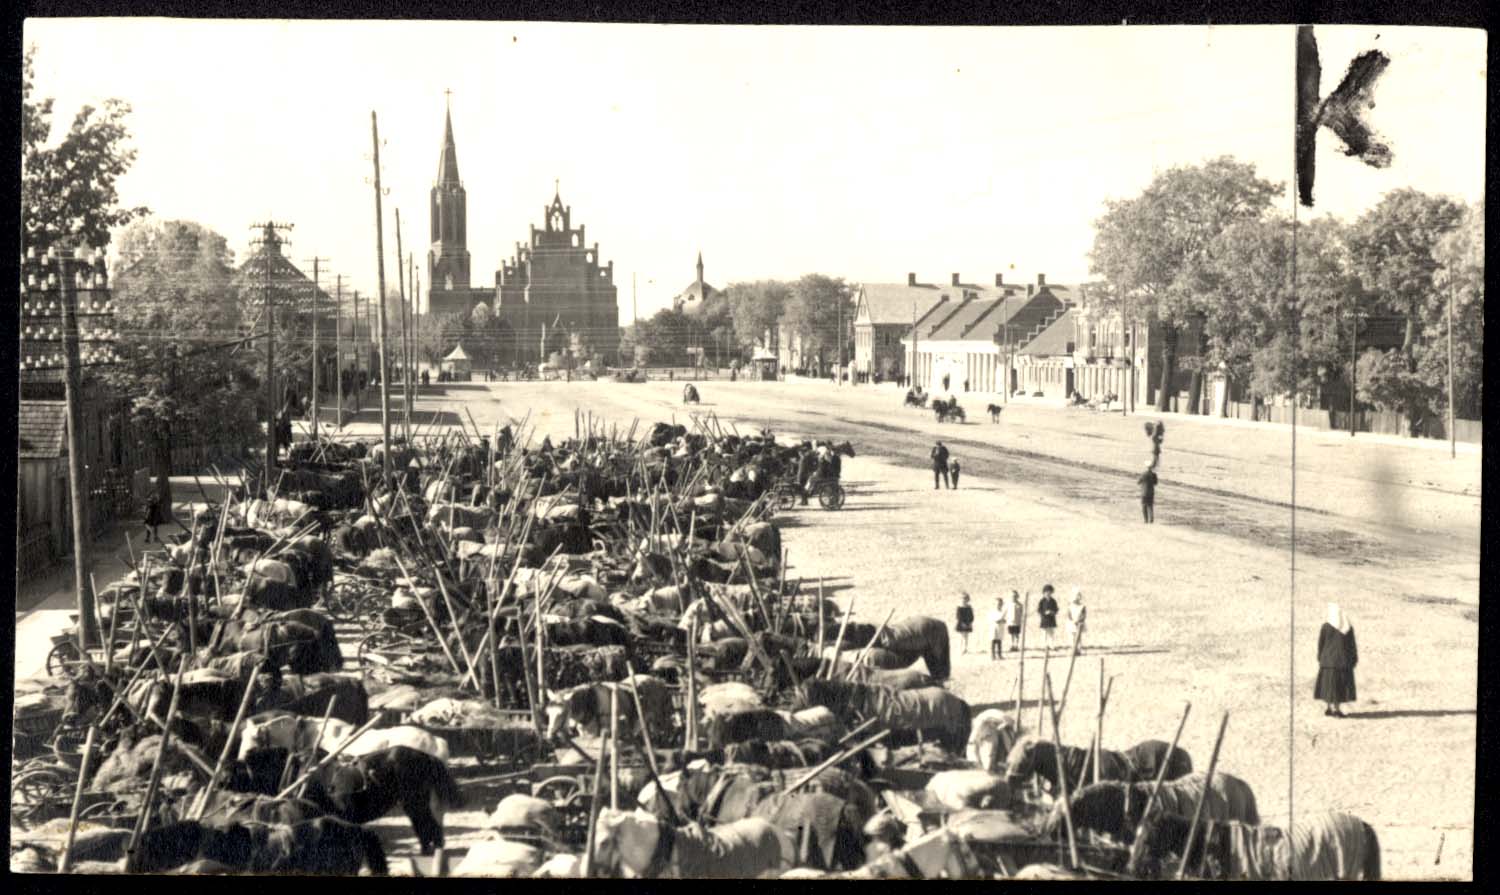 The town of Rokiskis before World War II